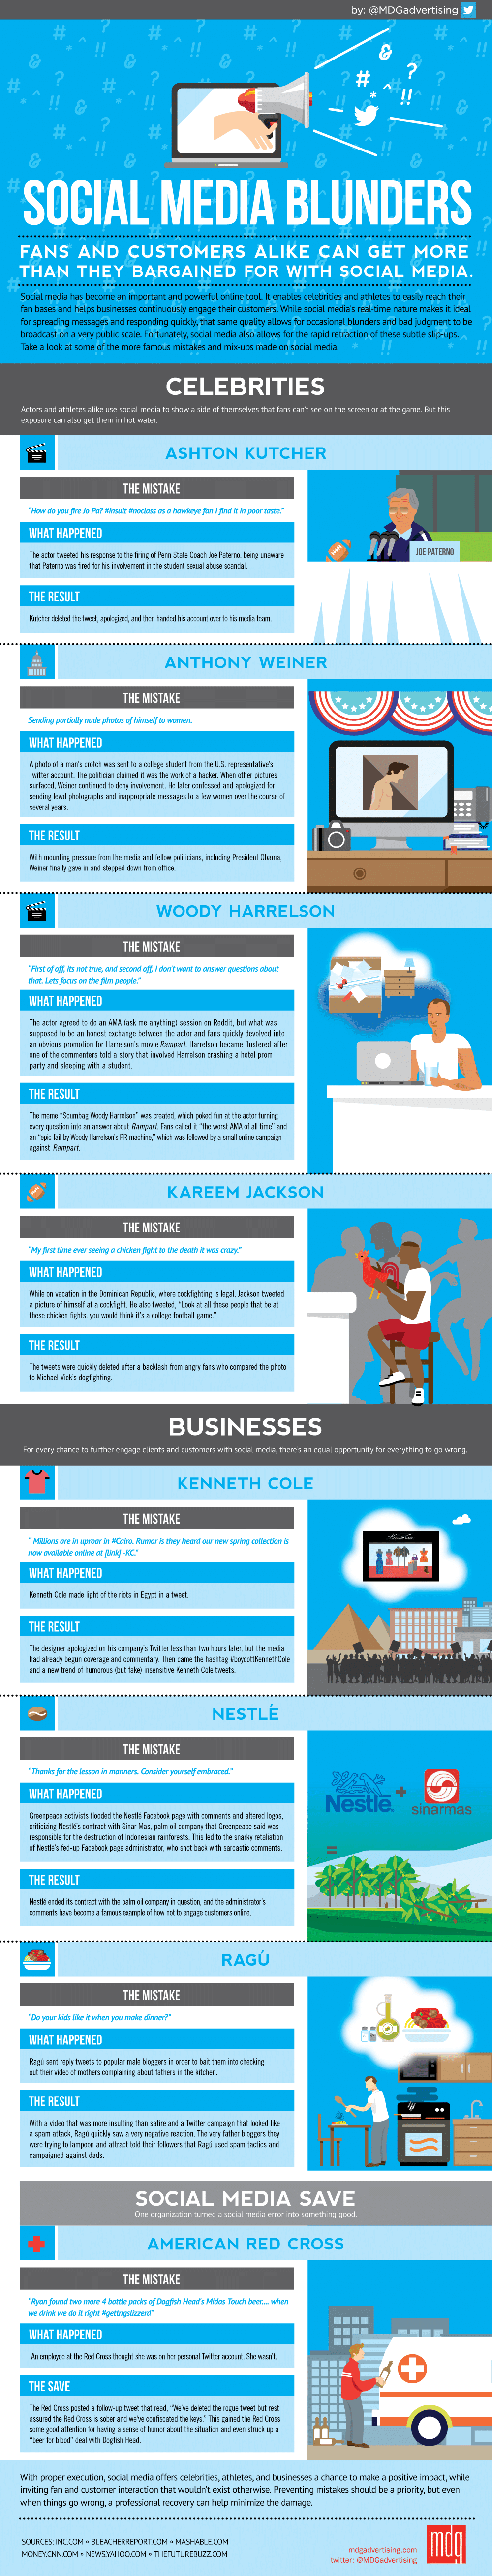 Blunders In Social Media History [Infographic]